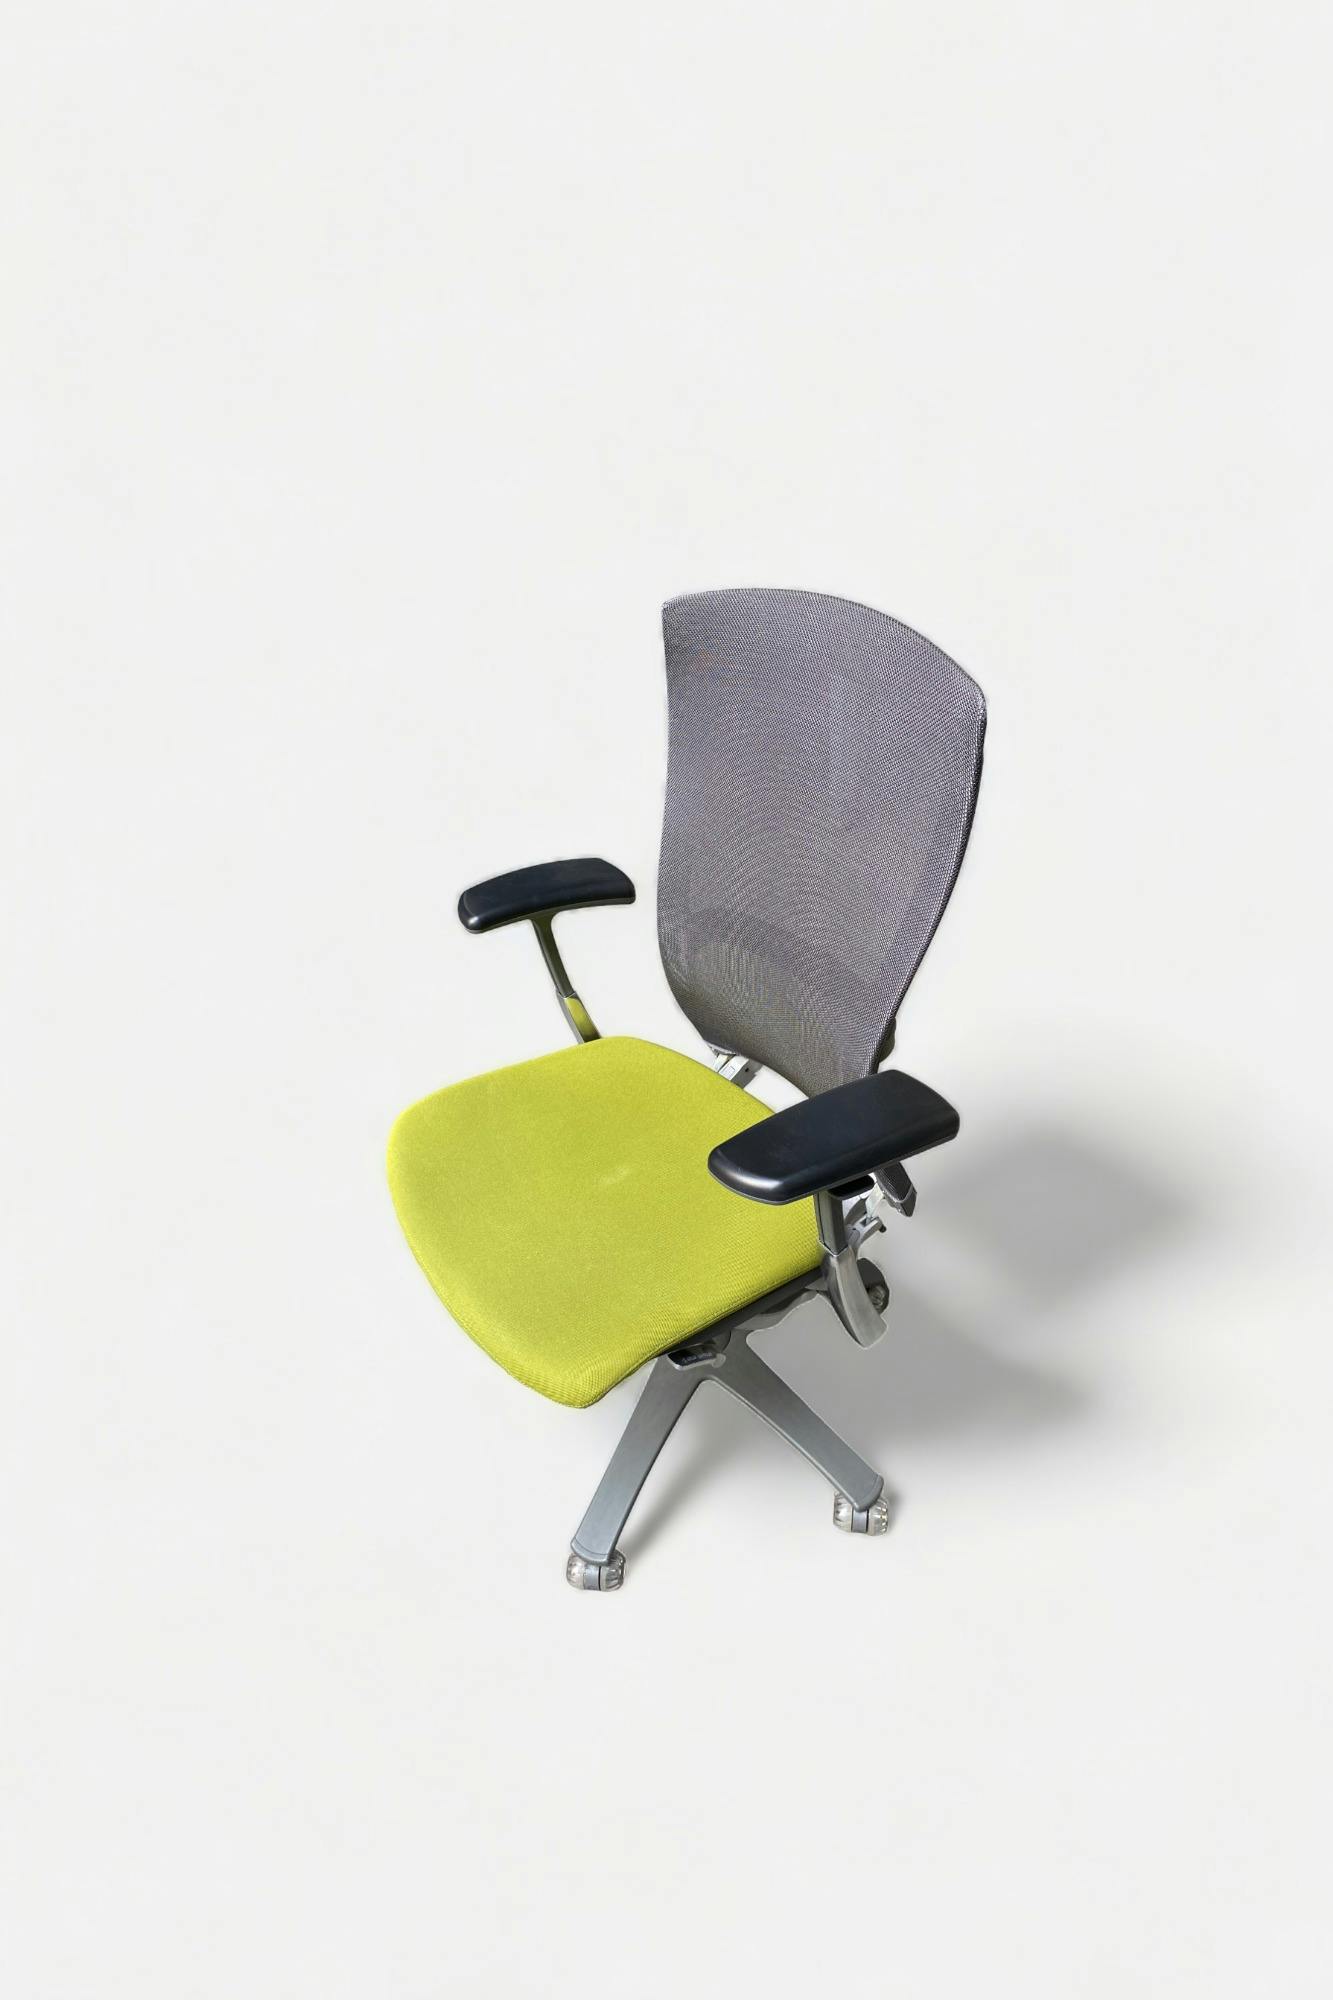 Knoll green office chair on wheels - Relieve Furniture